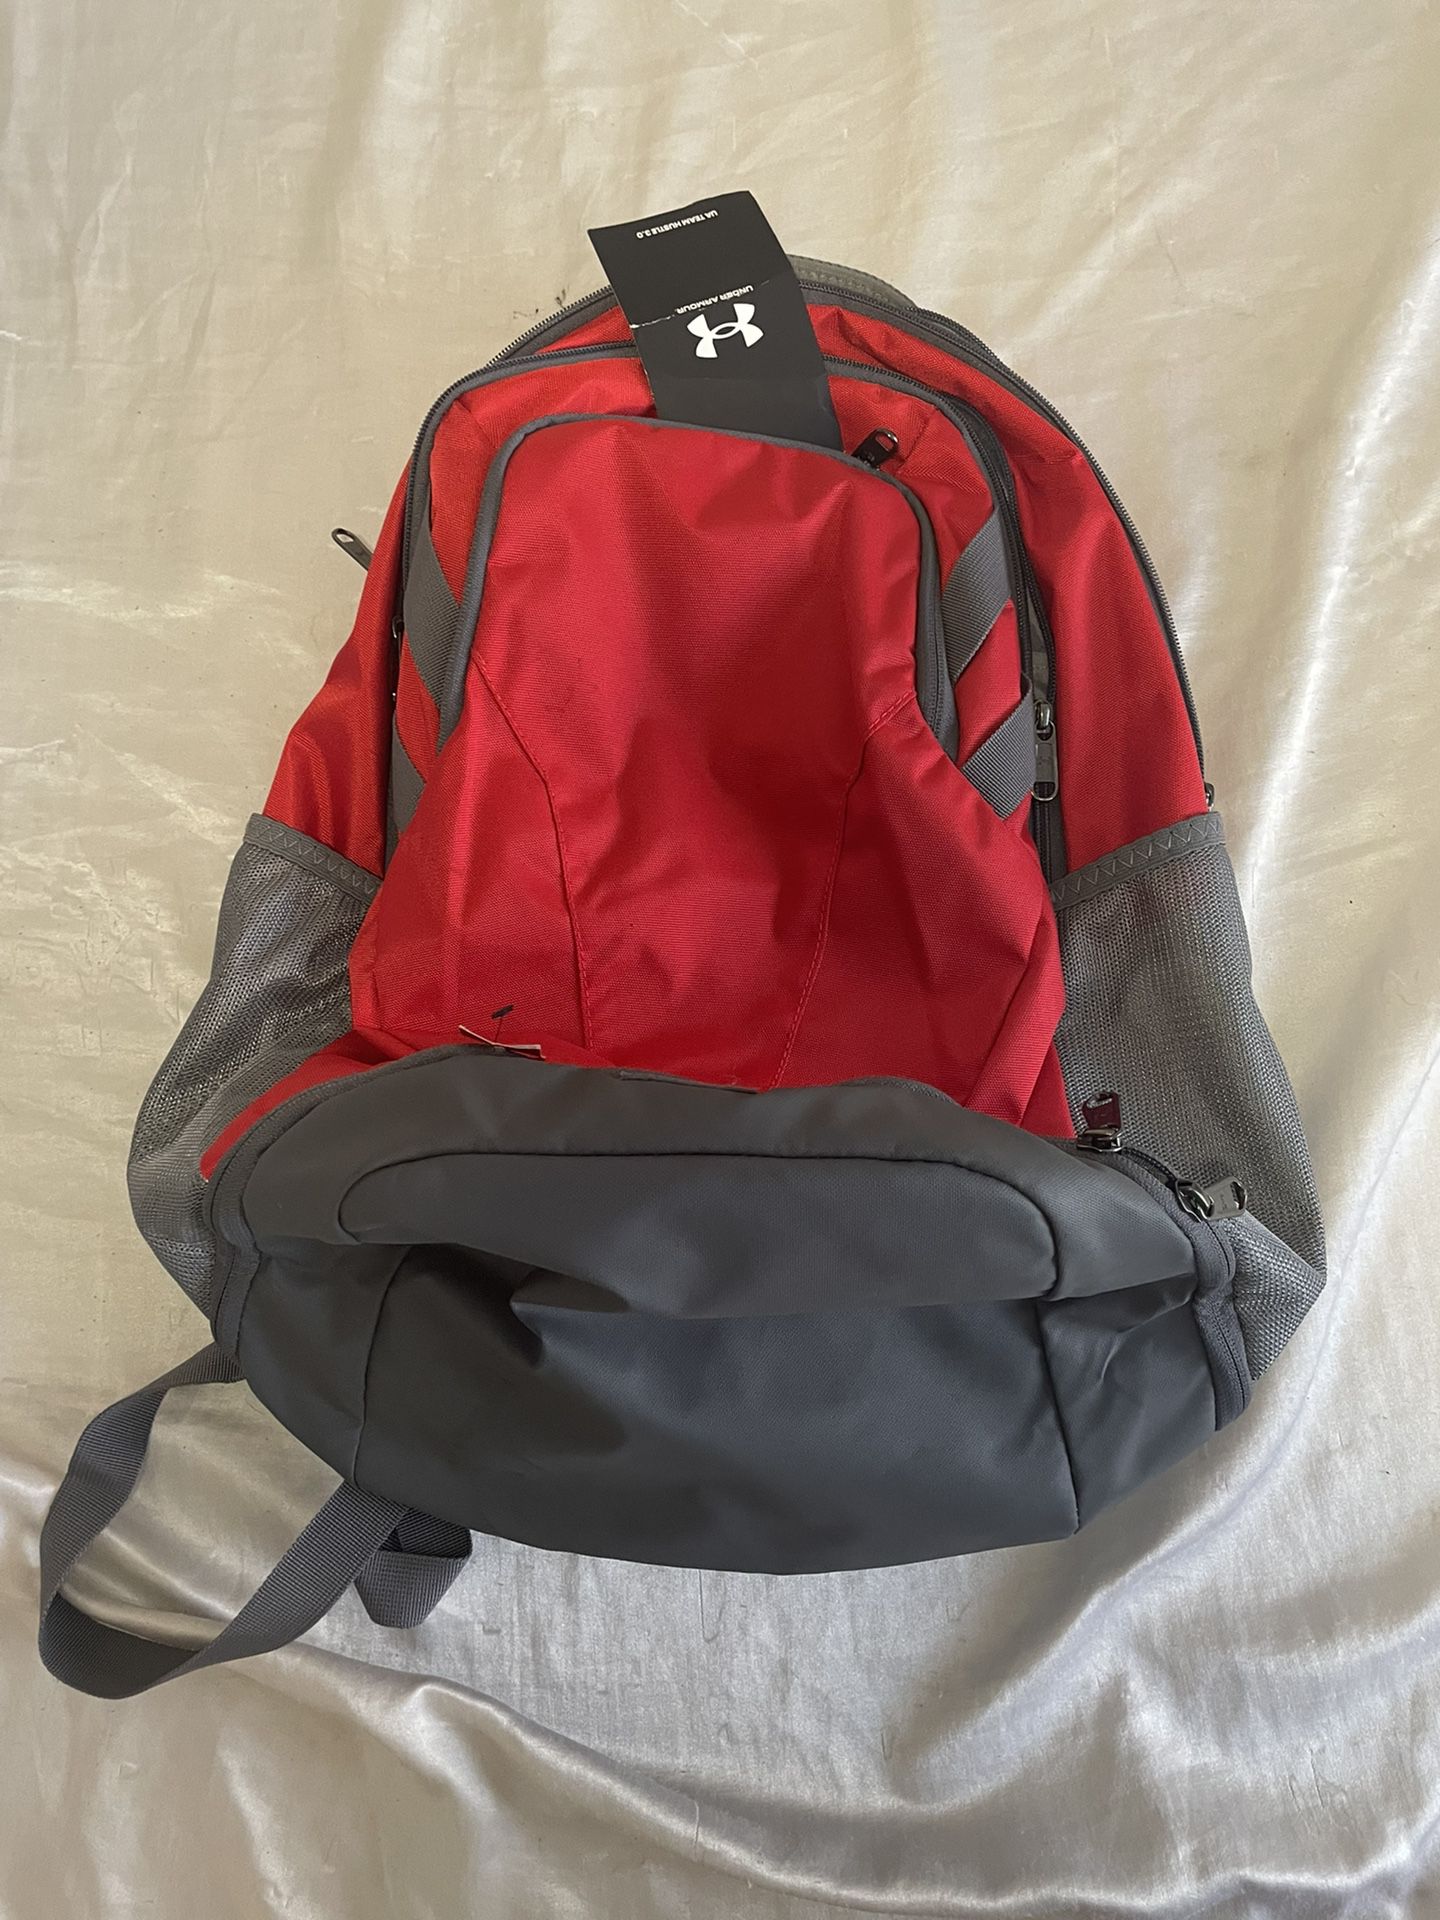 Brand new Under Armour back pack